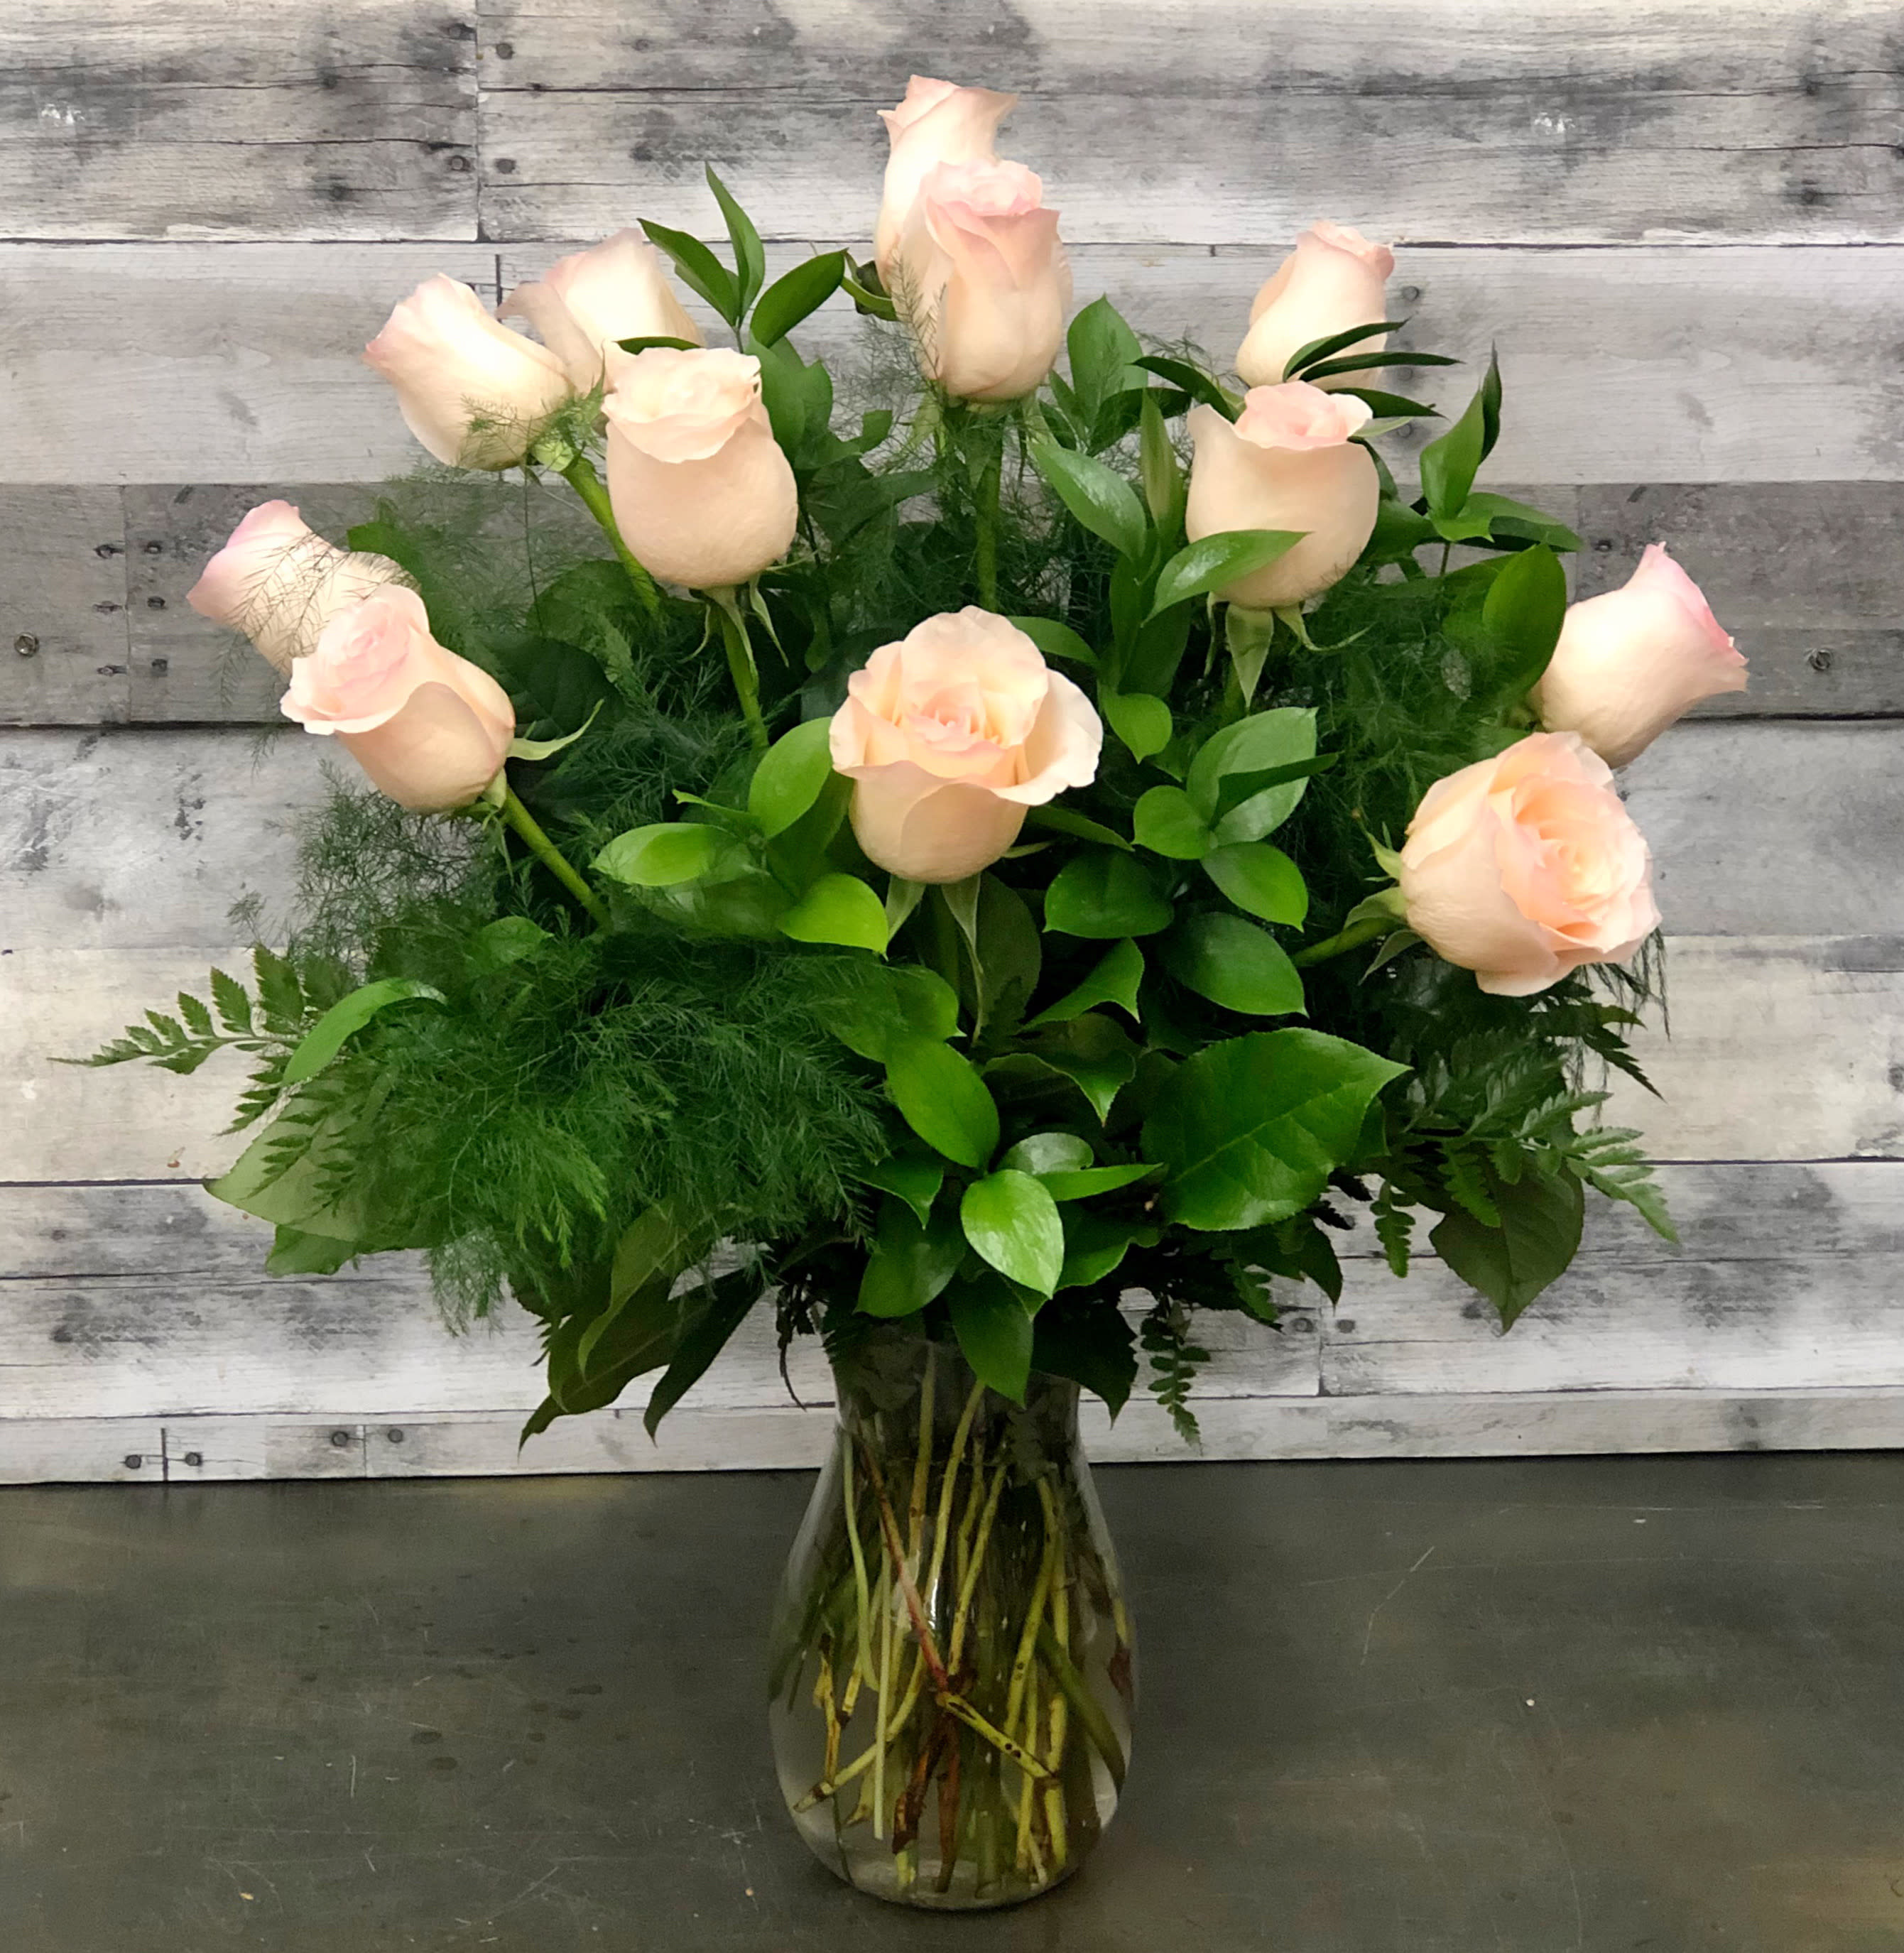 Classic Light Pink Roses - One dozen premium light pink roses arranged in a clear vase. Accent flowers available in the add-on section. Other colors available. Please specify second color choice when placing your order. Deluxe price includes 18 roses, Premium price includes 24 roses. Due to product availability, container may vary. 